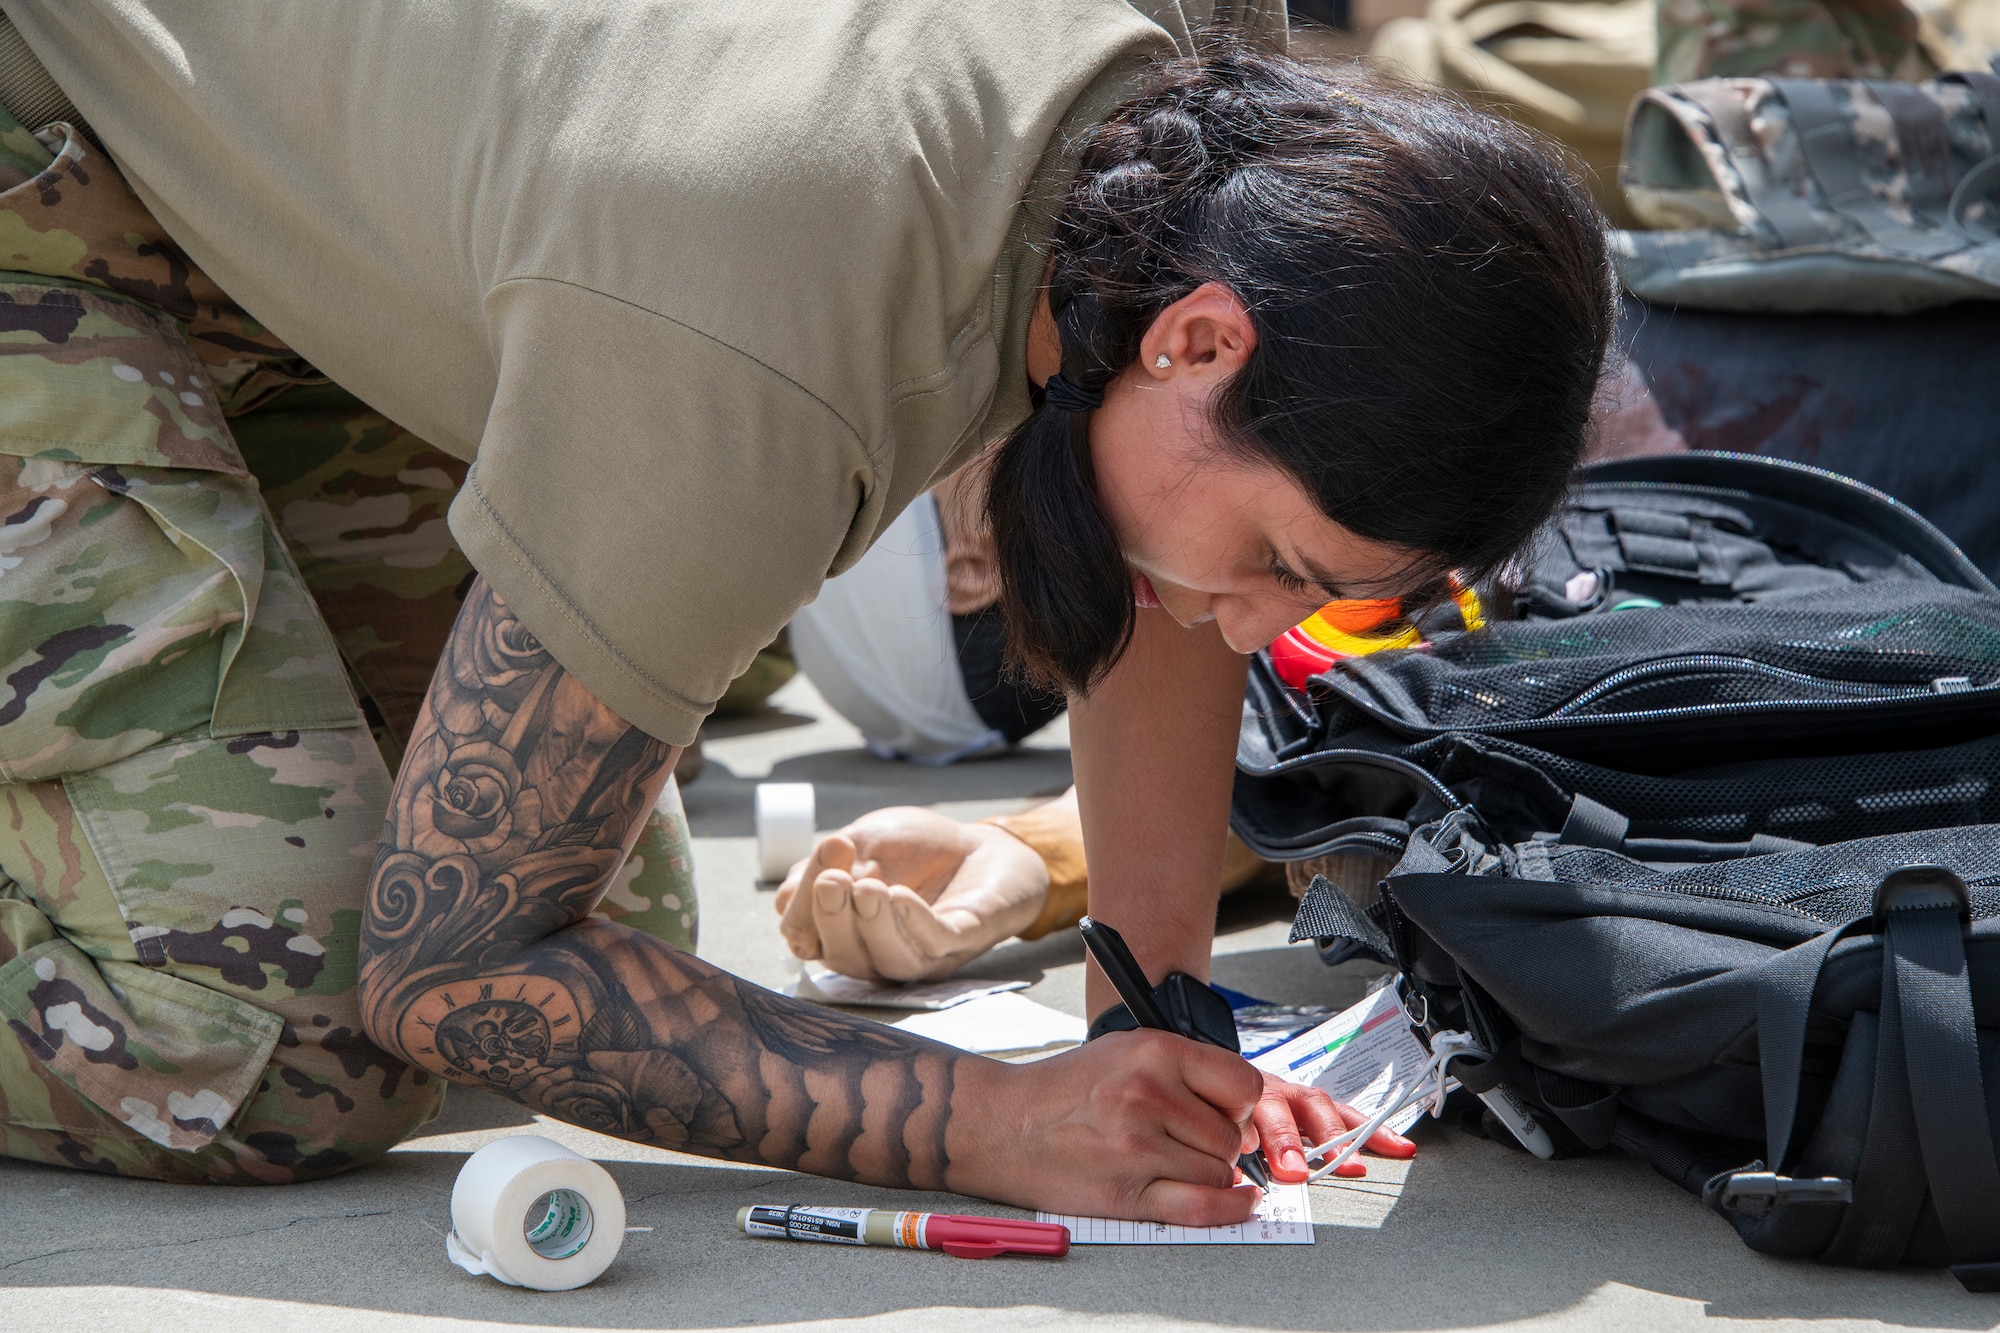 An Airman writes on paper.